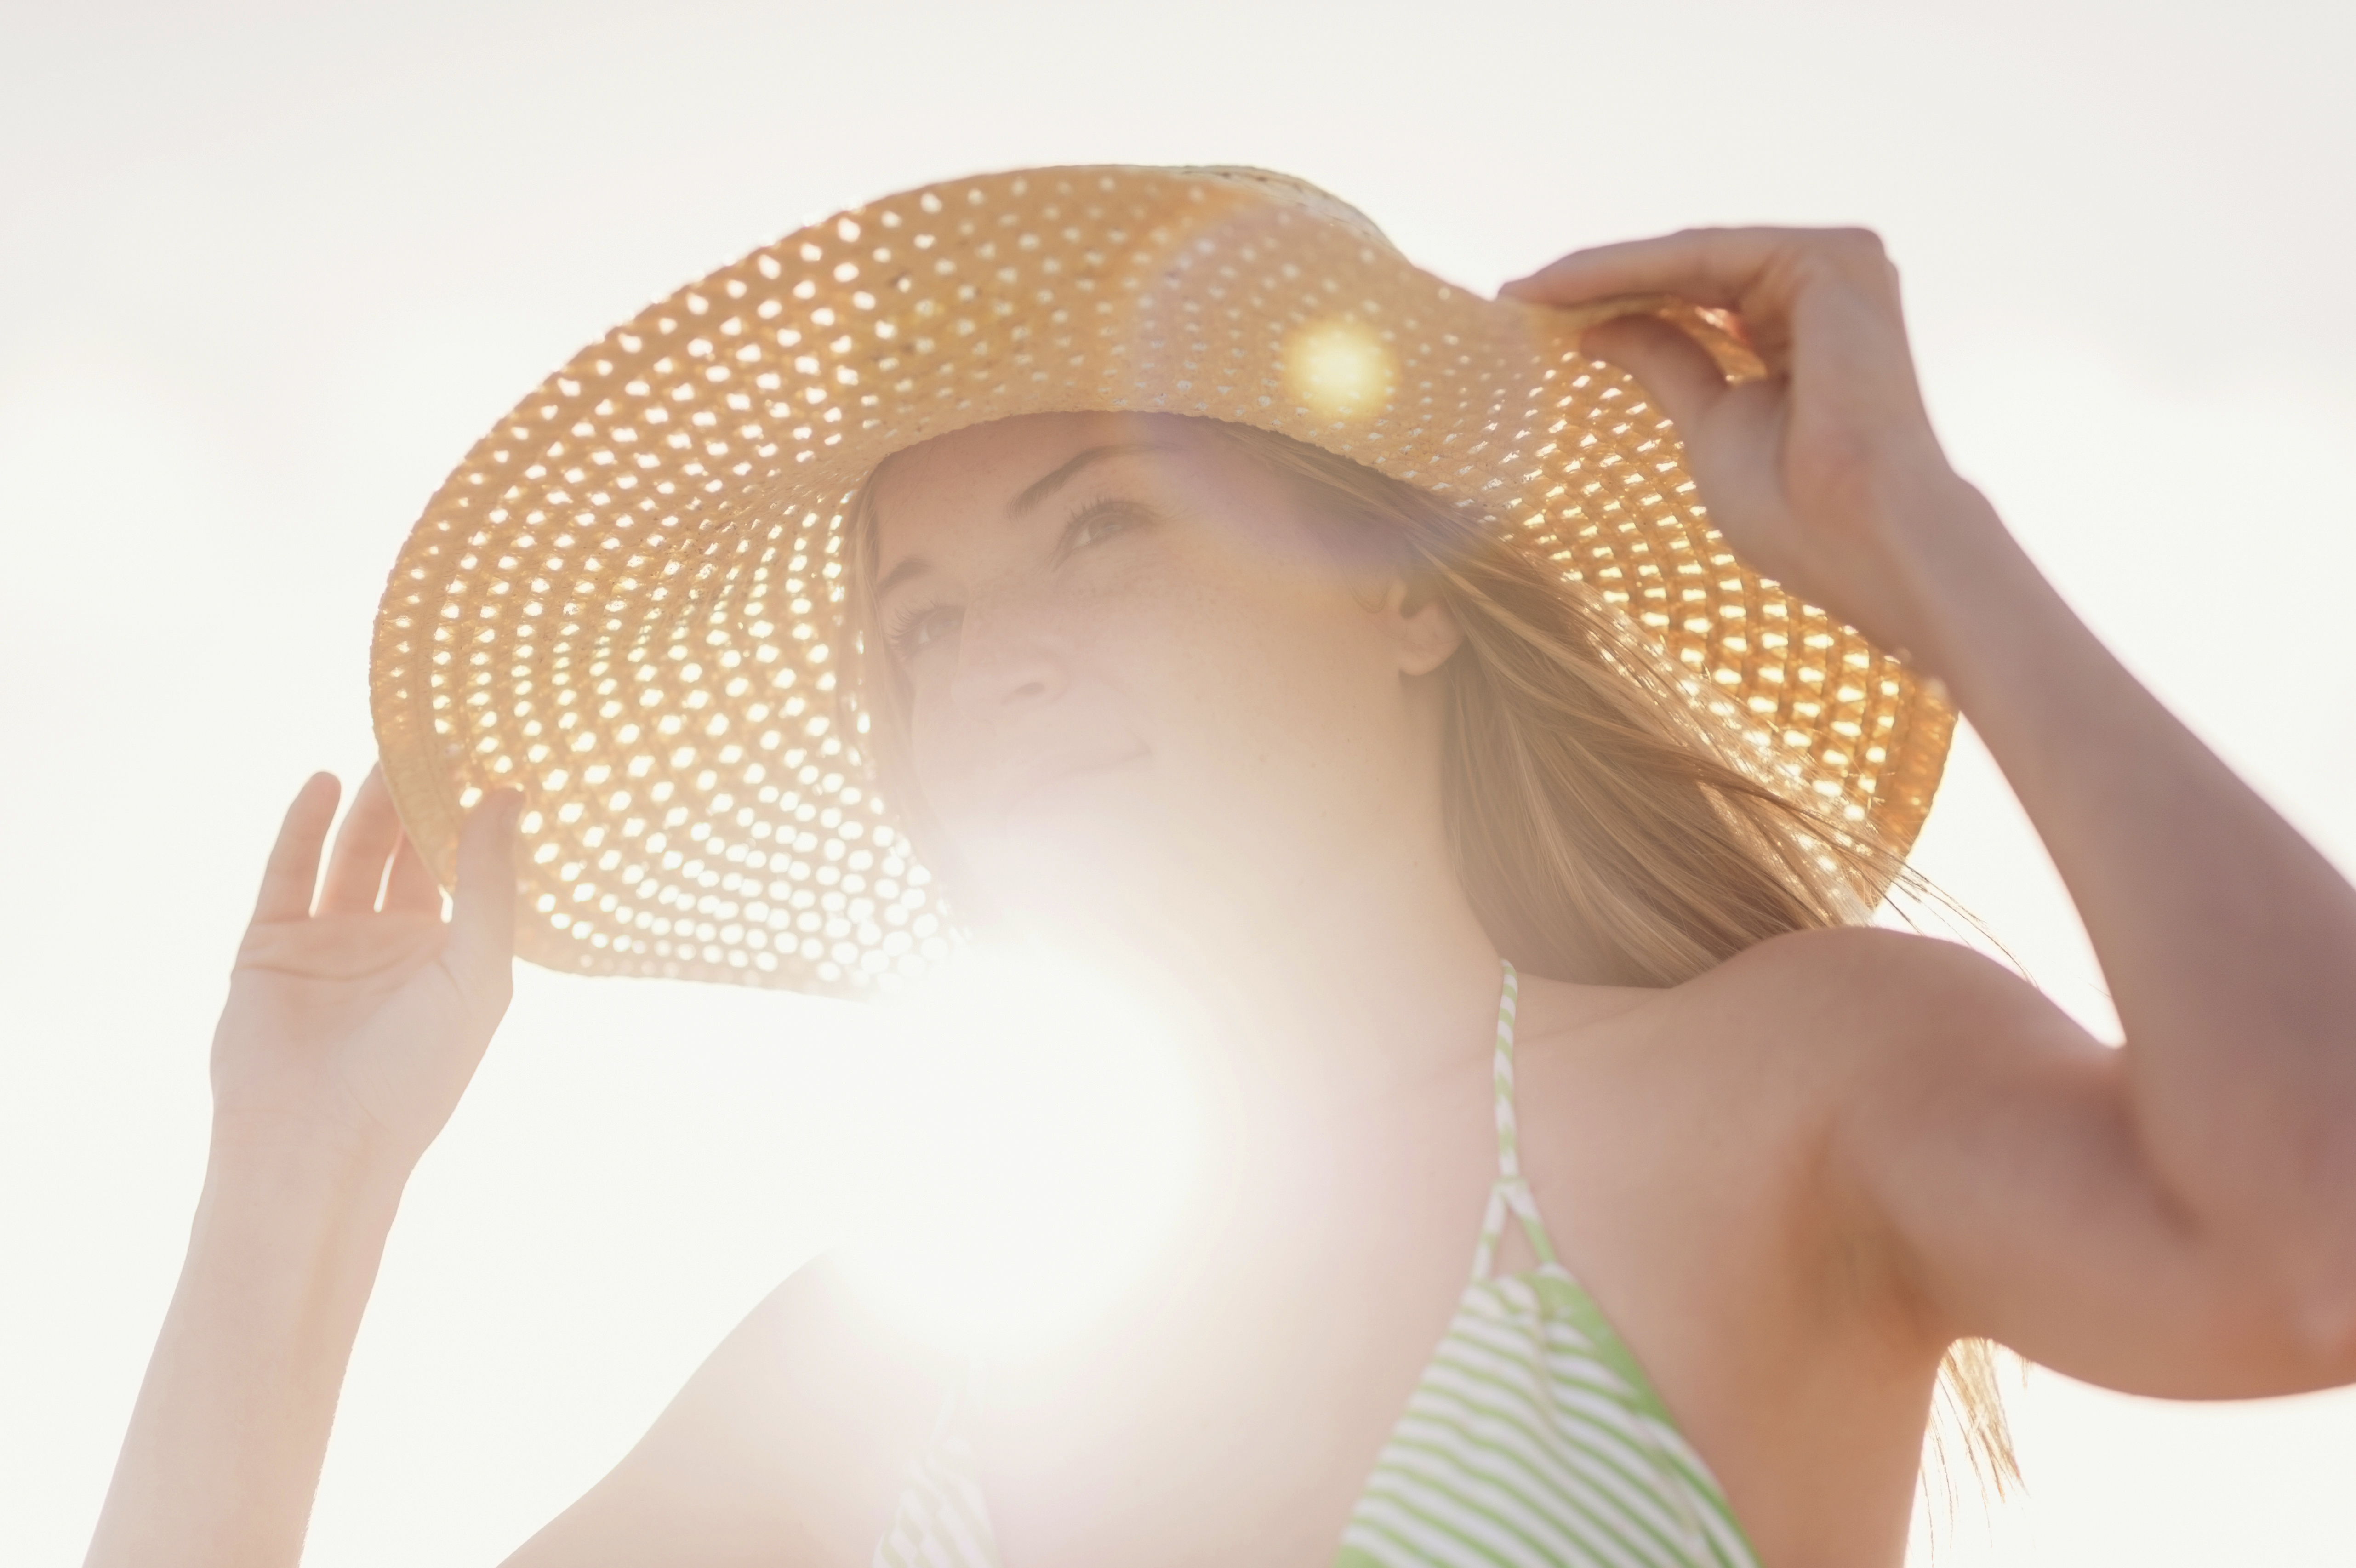 Are You One of the Many Australians Who Doesn’t Get Enough Vitamin D?